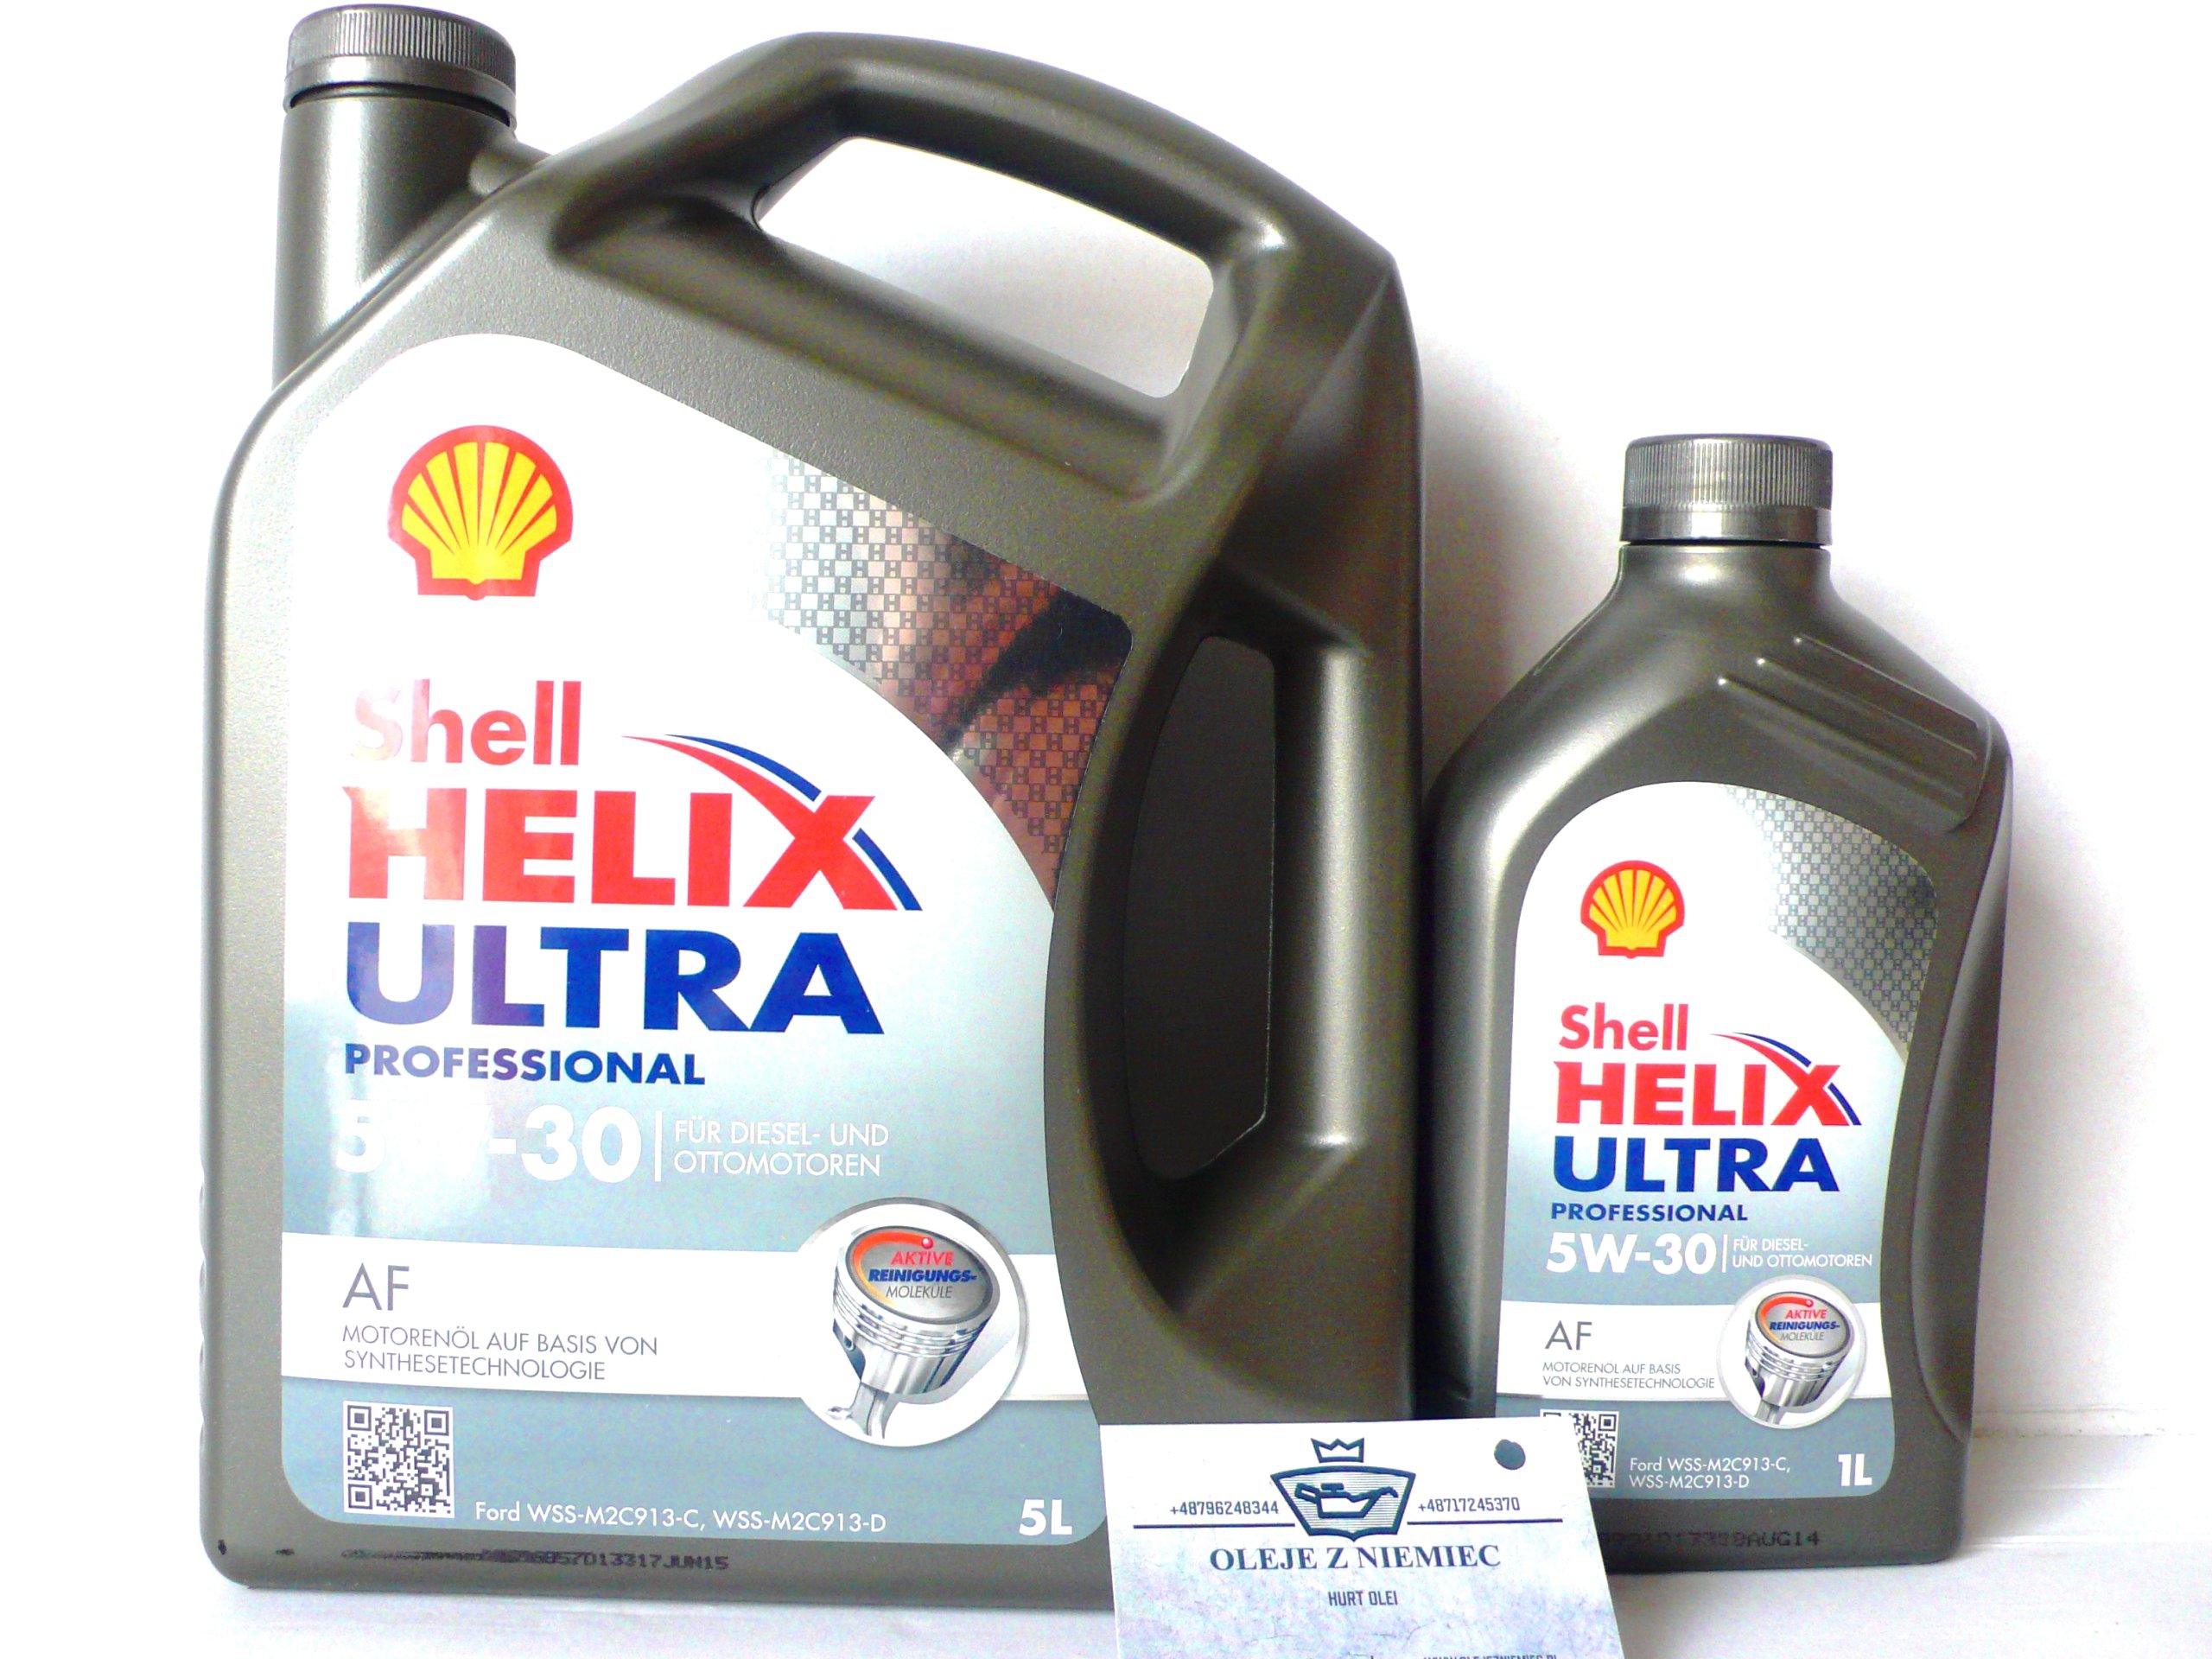 Моторное масло shell helix ultra 4л. Helix Ultra professional af 5w-30. Shell Helix Ultra professional af 5w-30. Shell Helix Ultra professional af 5w-30 4 л. Shell Helix Ultra Pro af 5w-30.